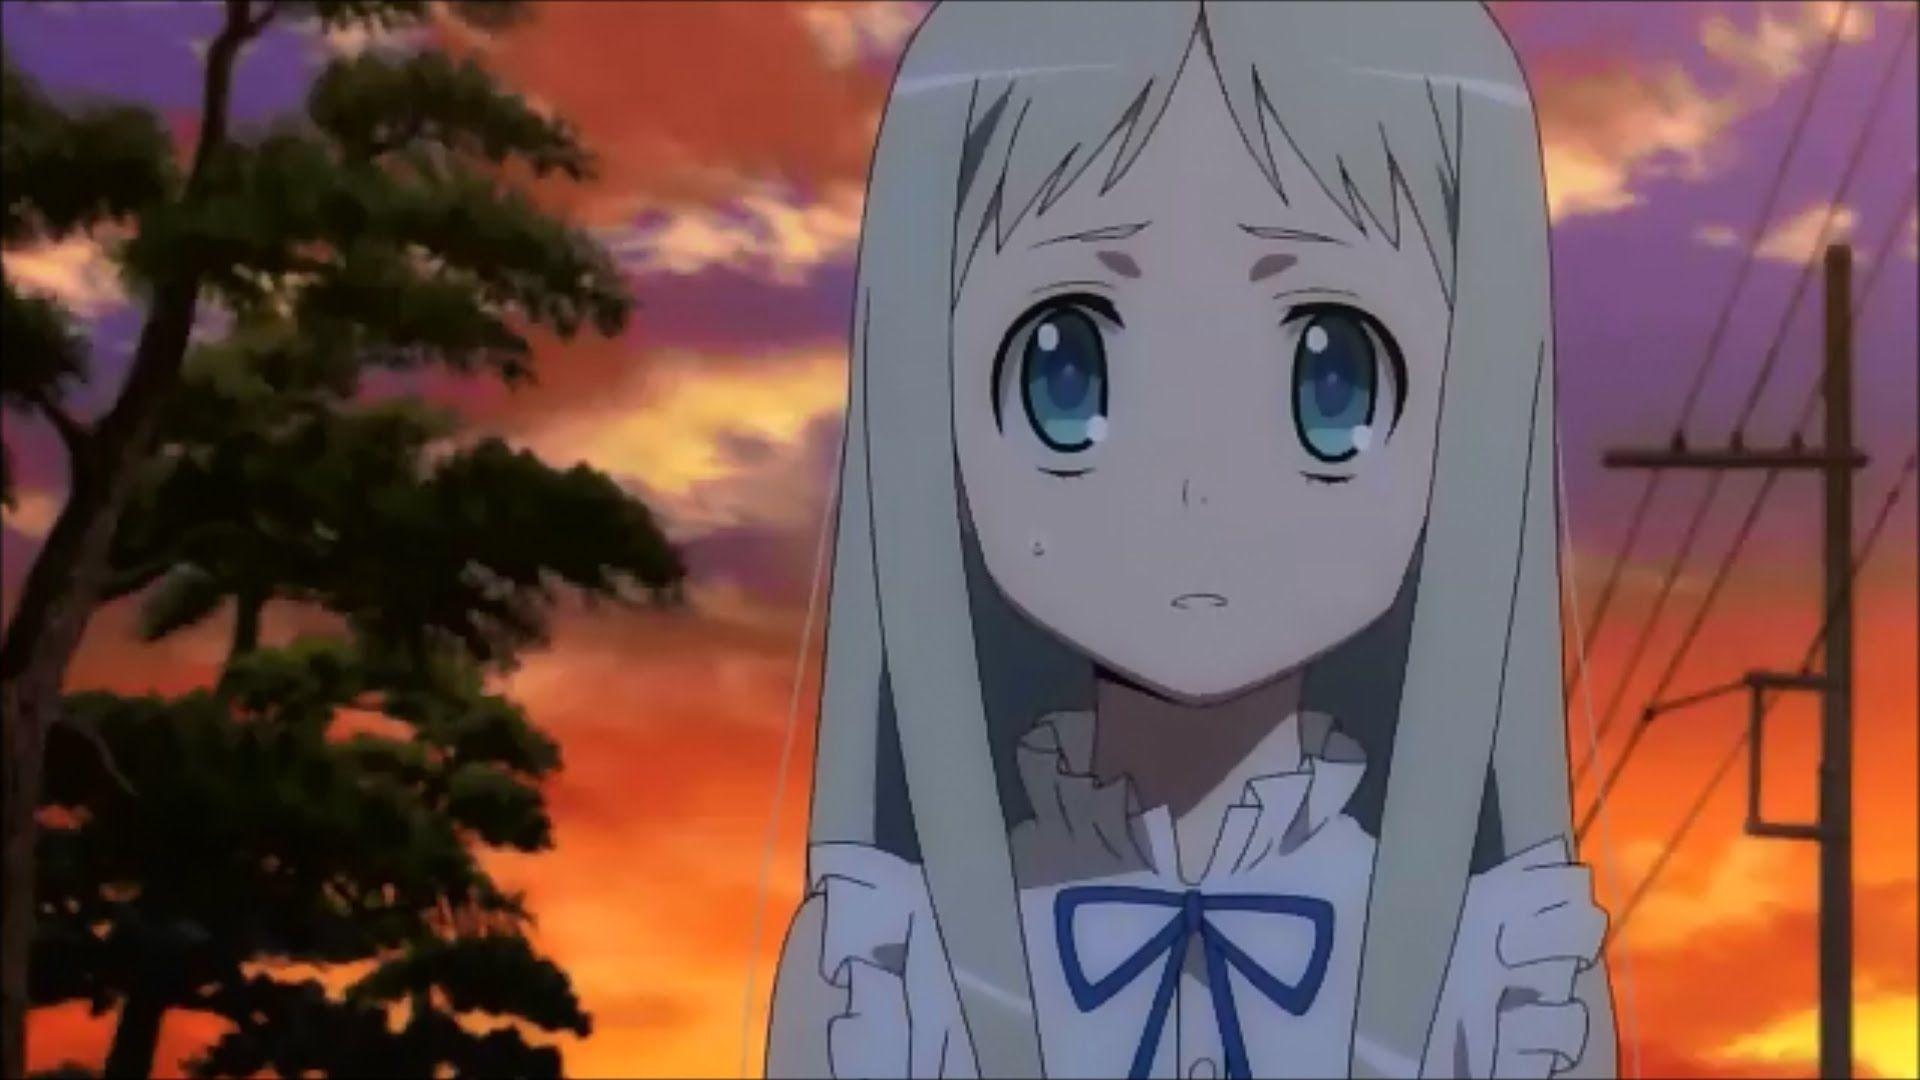 Anohana: The Flower We Saw That Day, Movie trailer, Anime series, Emotional journey, 1920x1080 Full HD Desktop